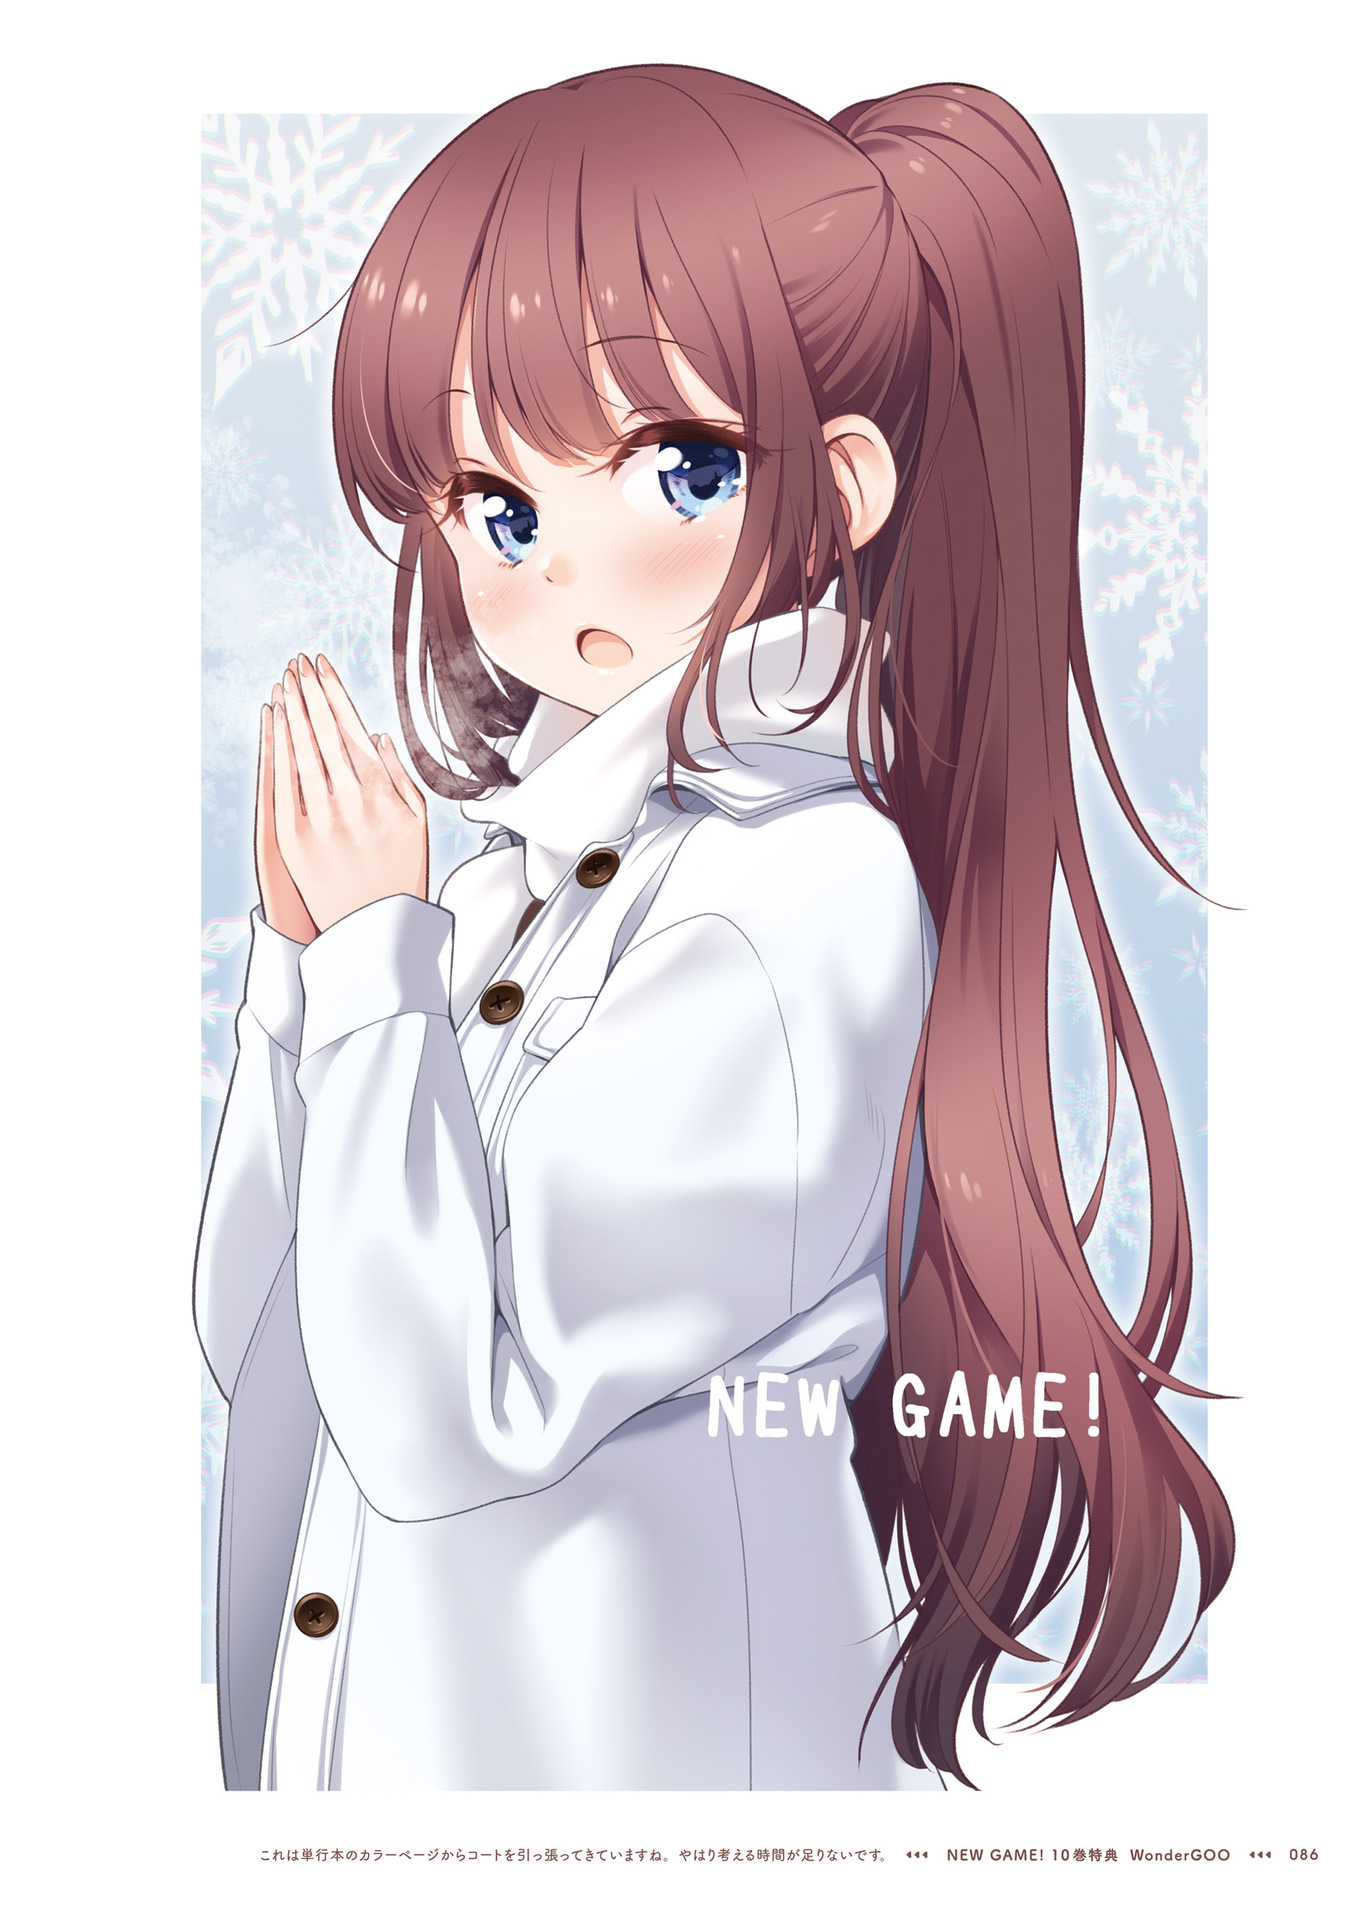 NEW GAME！官方画集 NEXT GAME！上